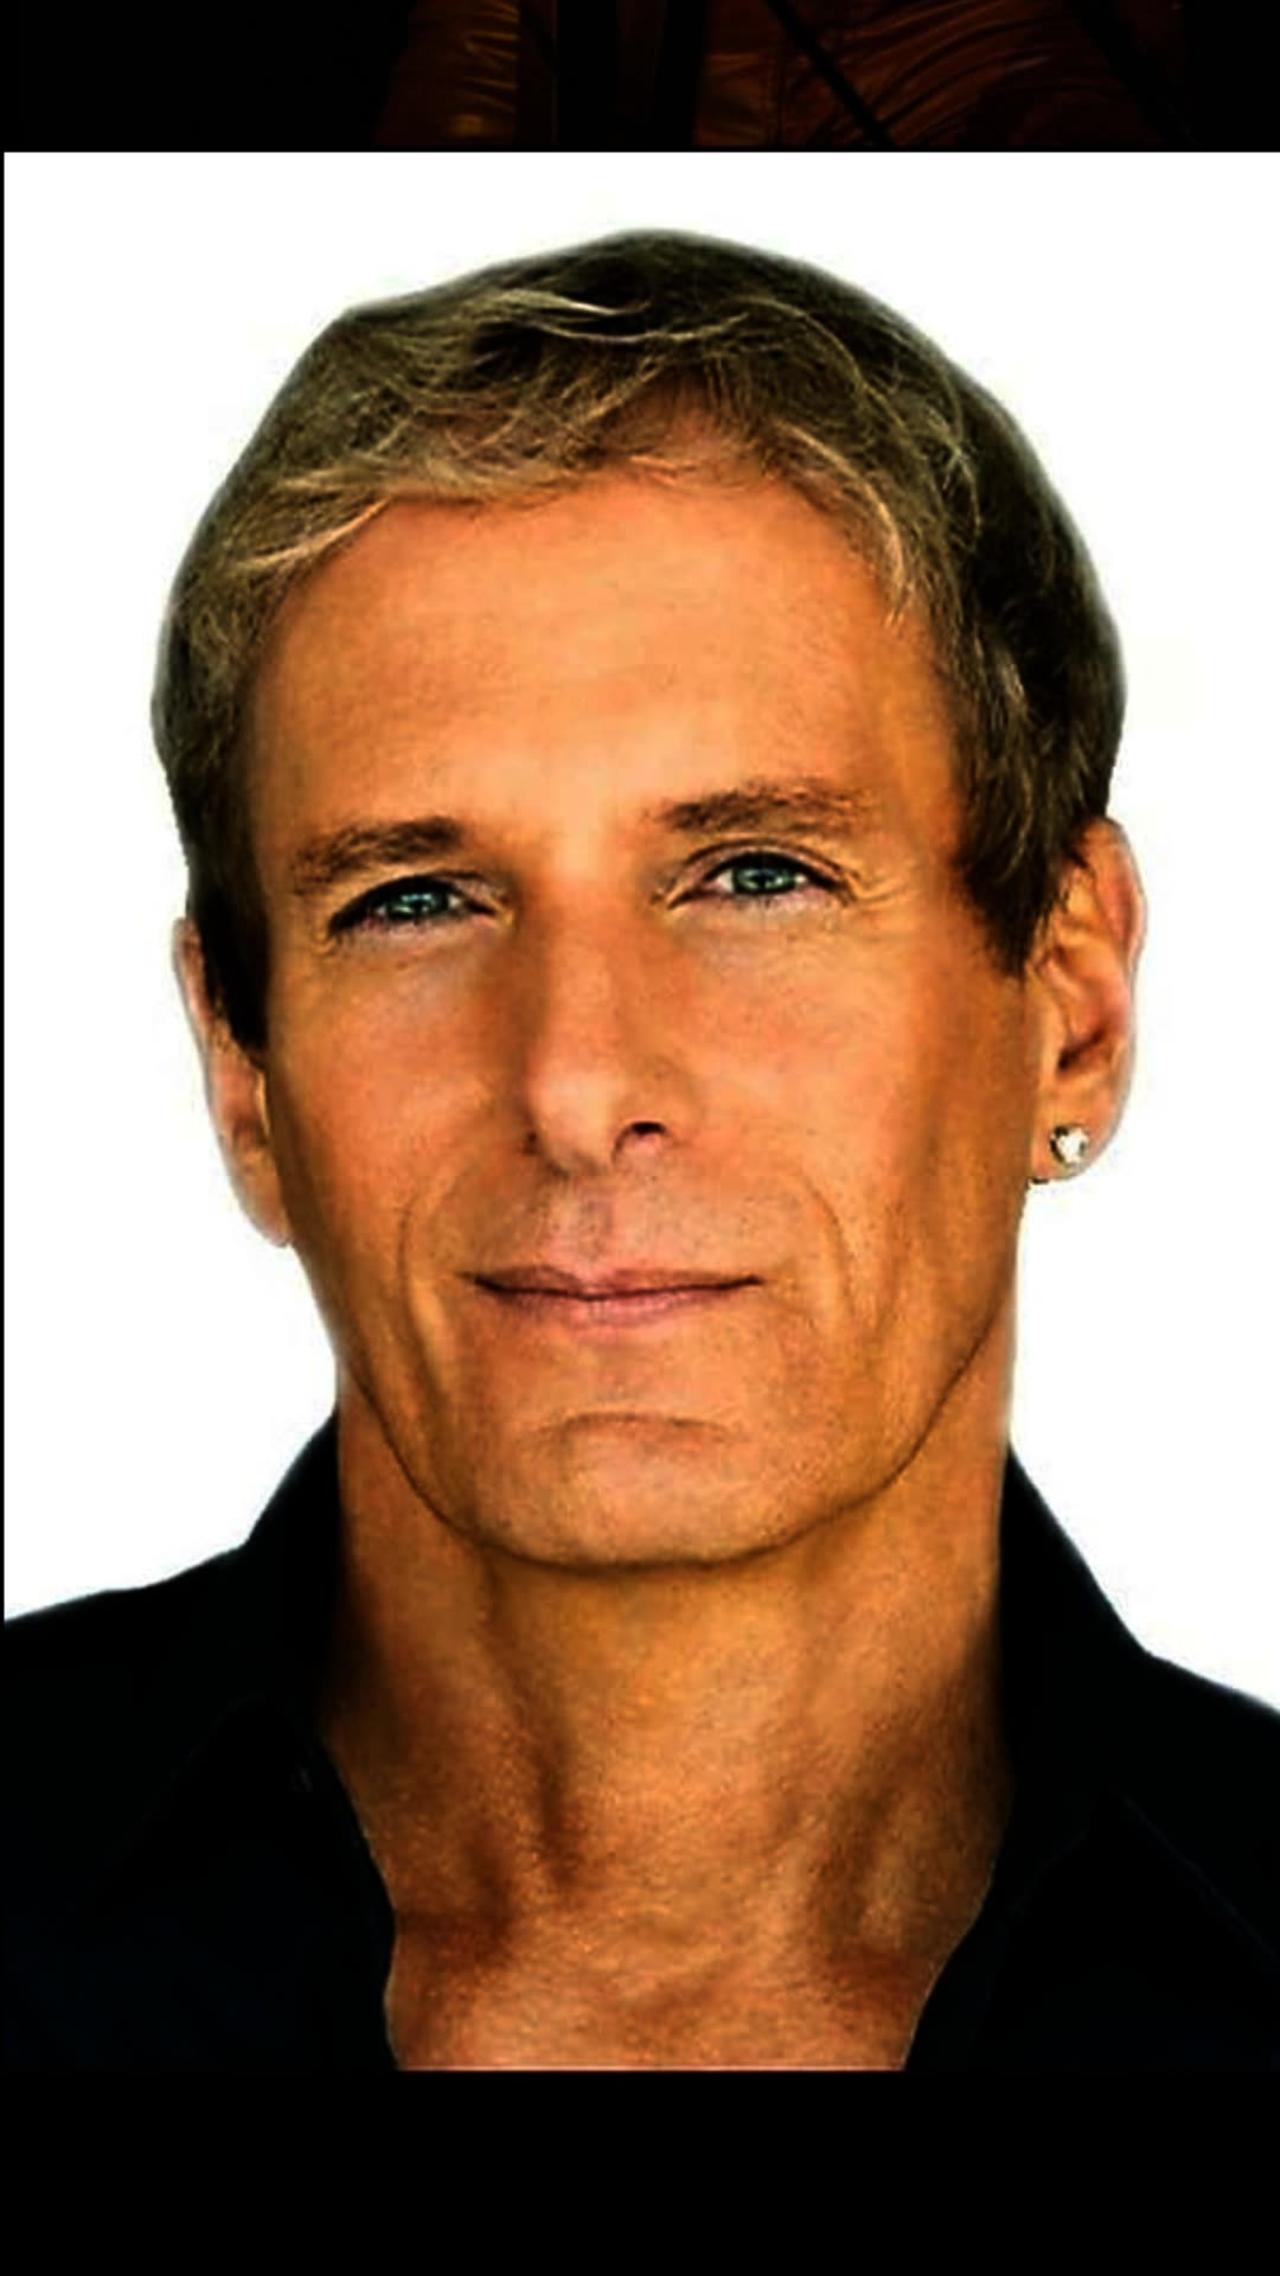 “HOW AM I SUPPOSED TO LIVE WITHOUT YOU” by MICHAEL BOLTON